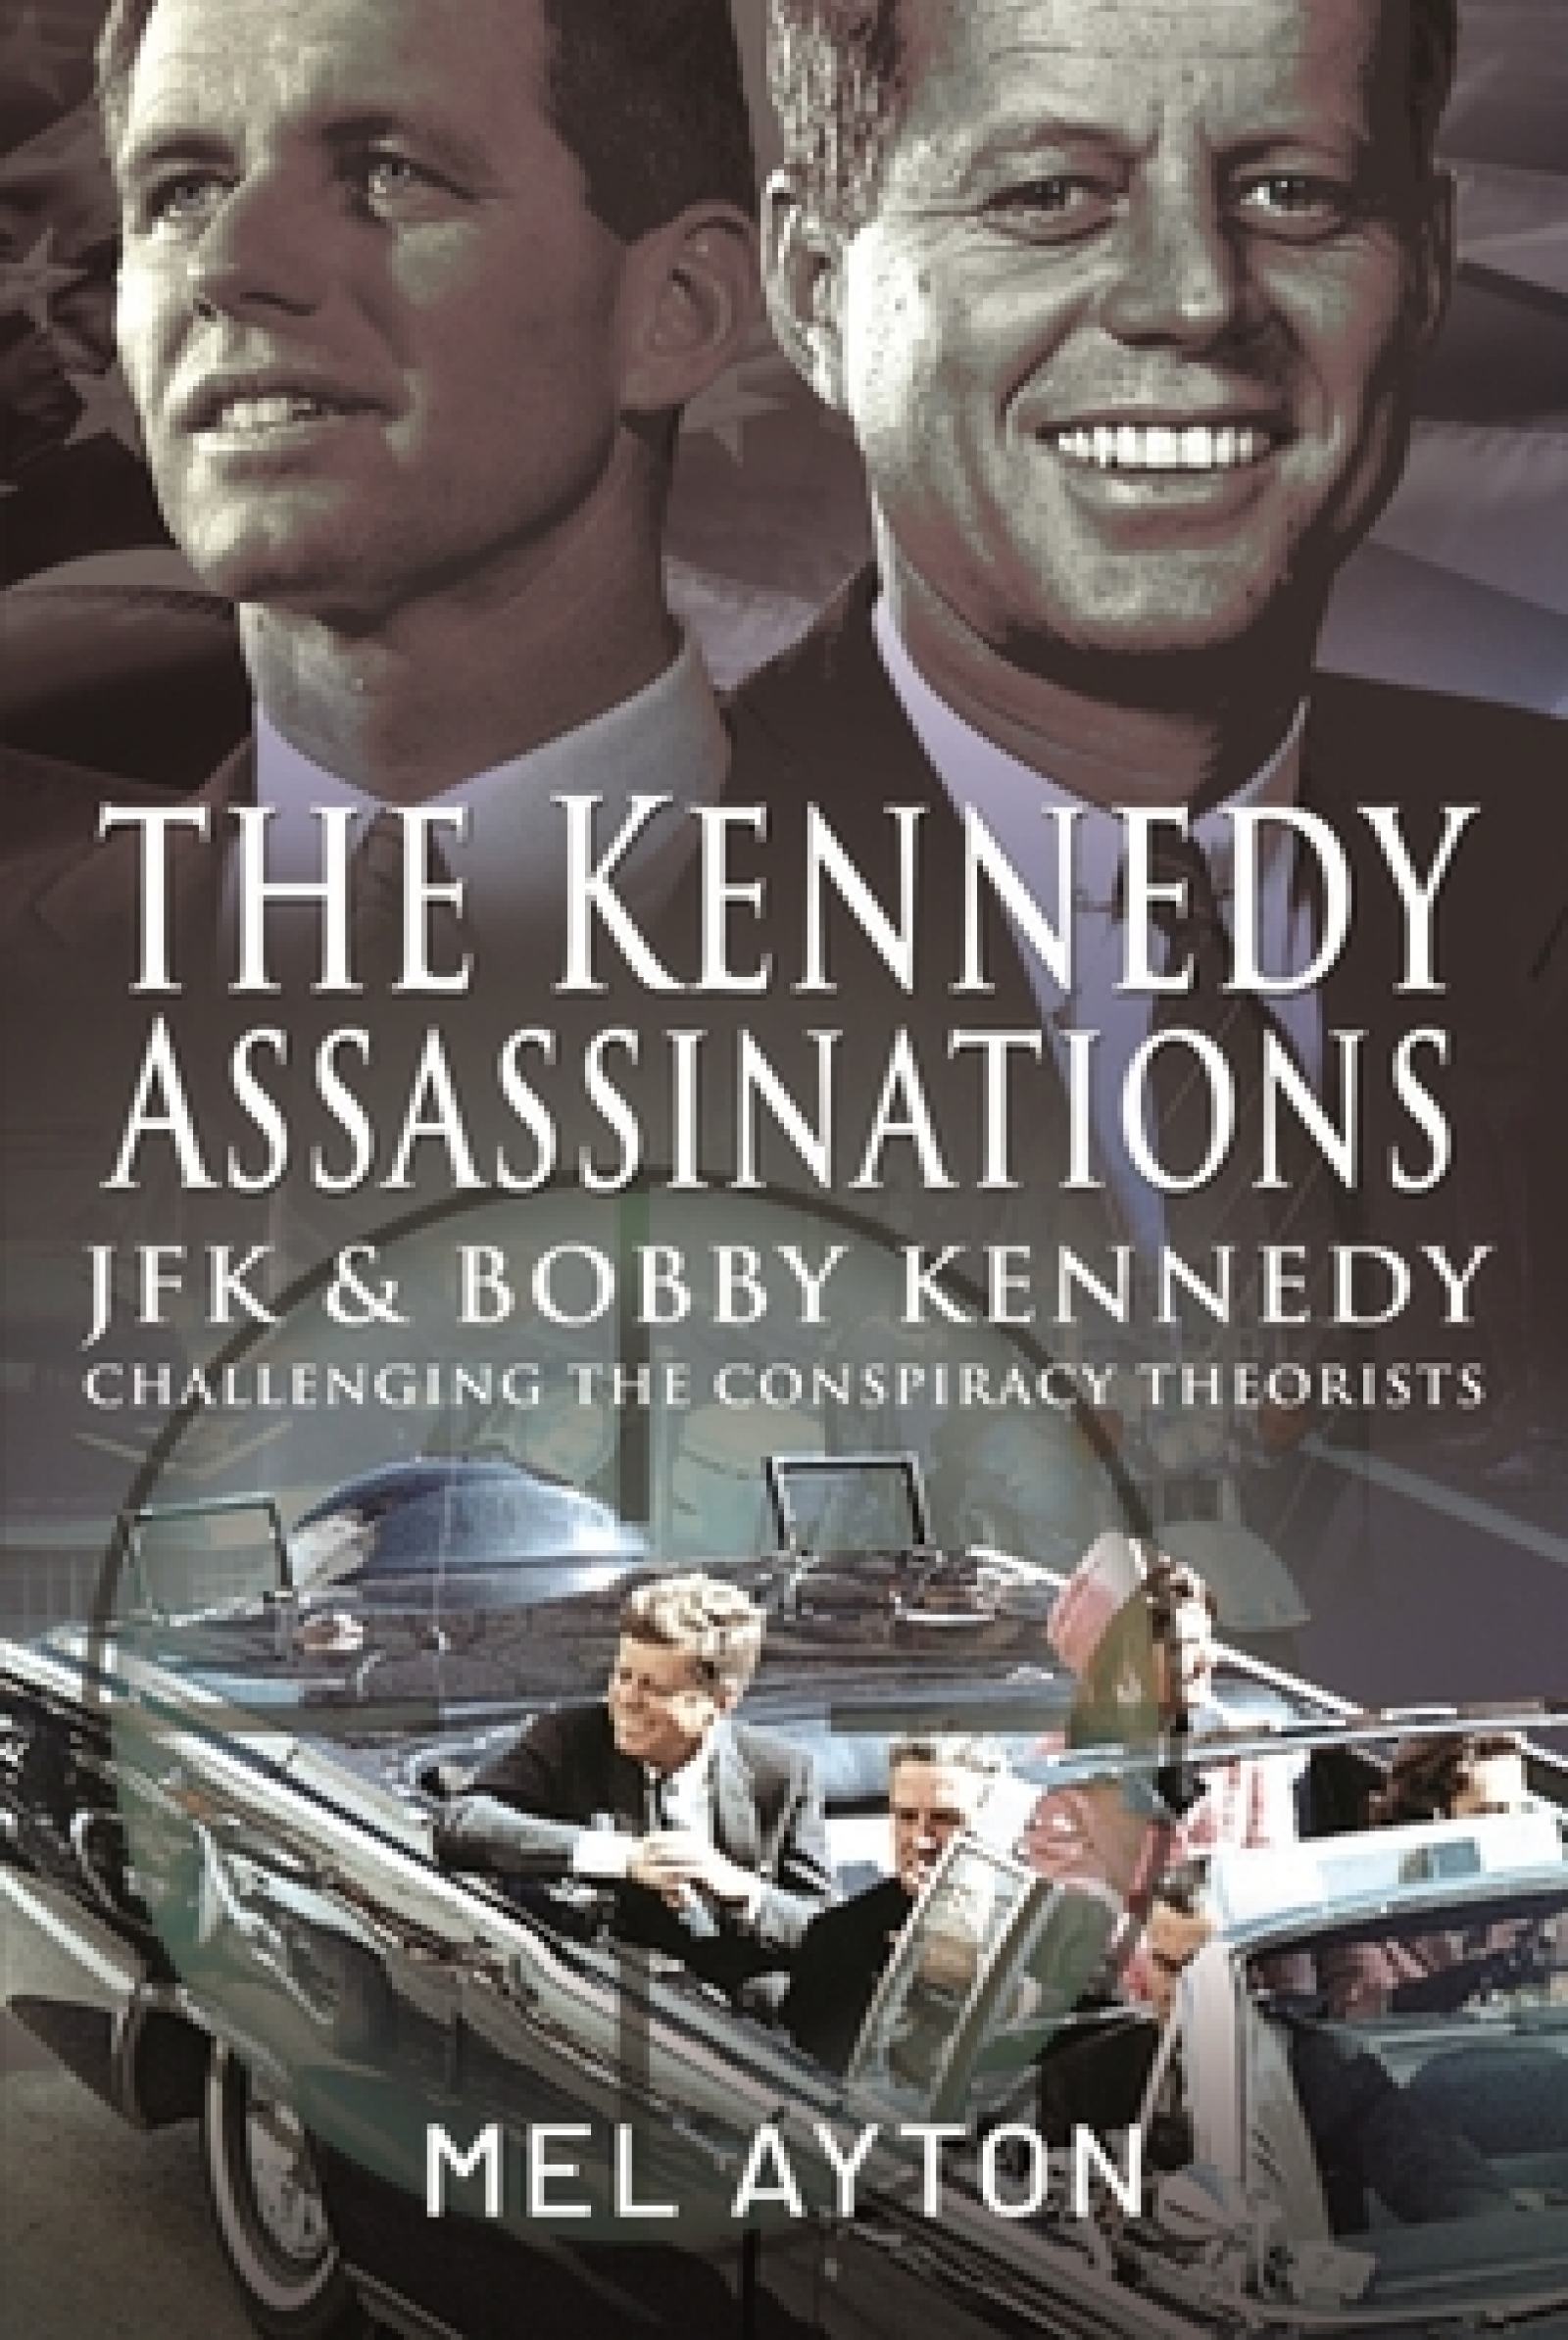 Mel Ayton's The Kennedy Assassinations: A Review